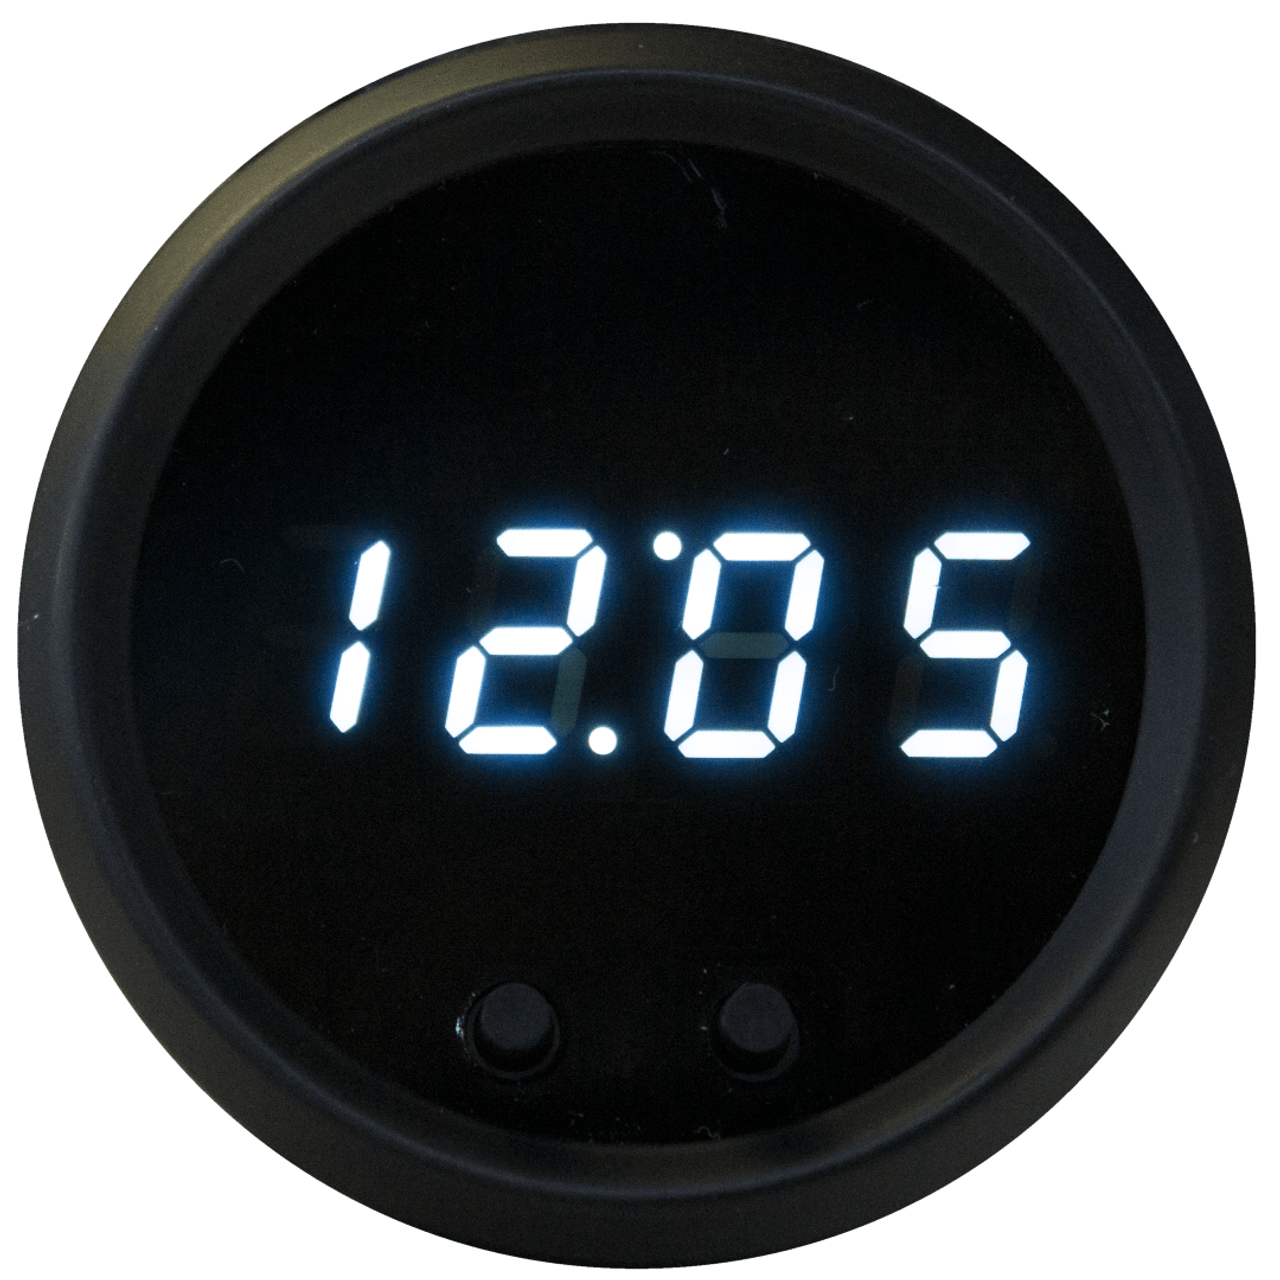 Clock LED Digital Chrome Bezel - MS8009
Intellitronix LED Digital Clock is microprocessor-controlled and works with any vehicle. This sharp looking Clock uses the 12-hour format with 2 button programming and the display completely blacks out when the ignition is turned off. It is accurate, super bright, and intelligent all in one.
